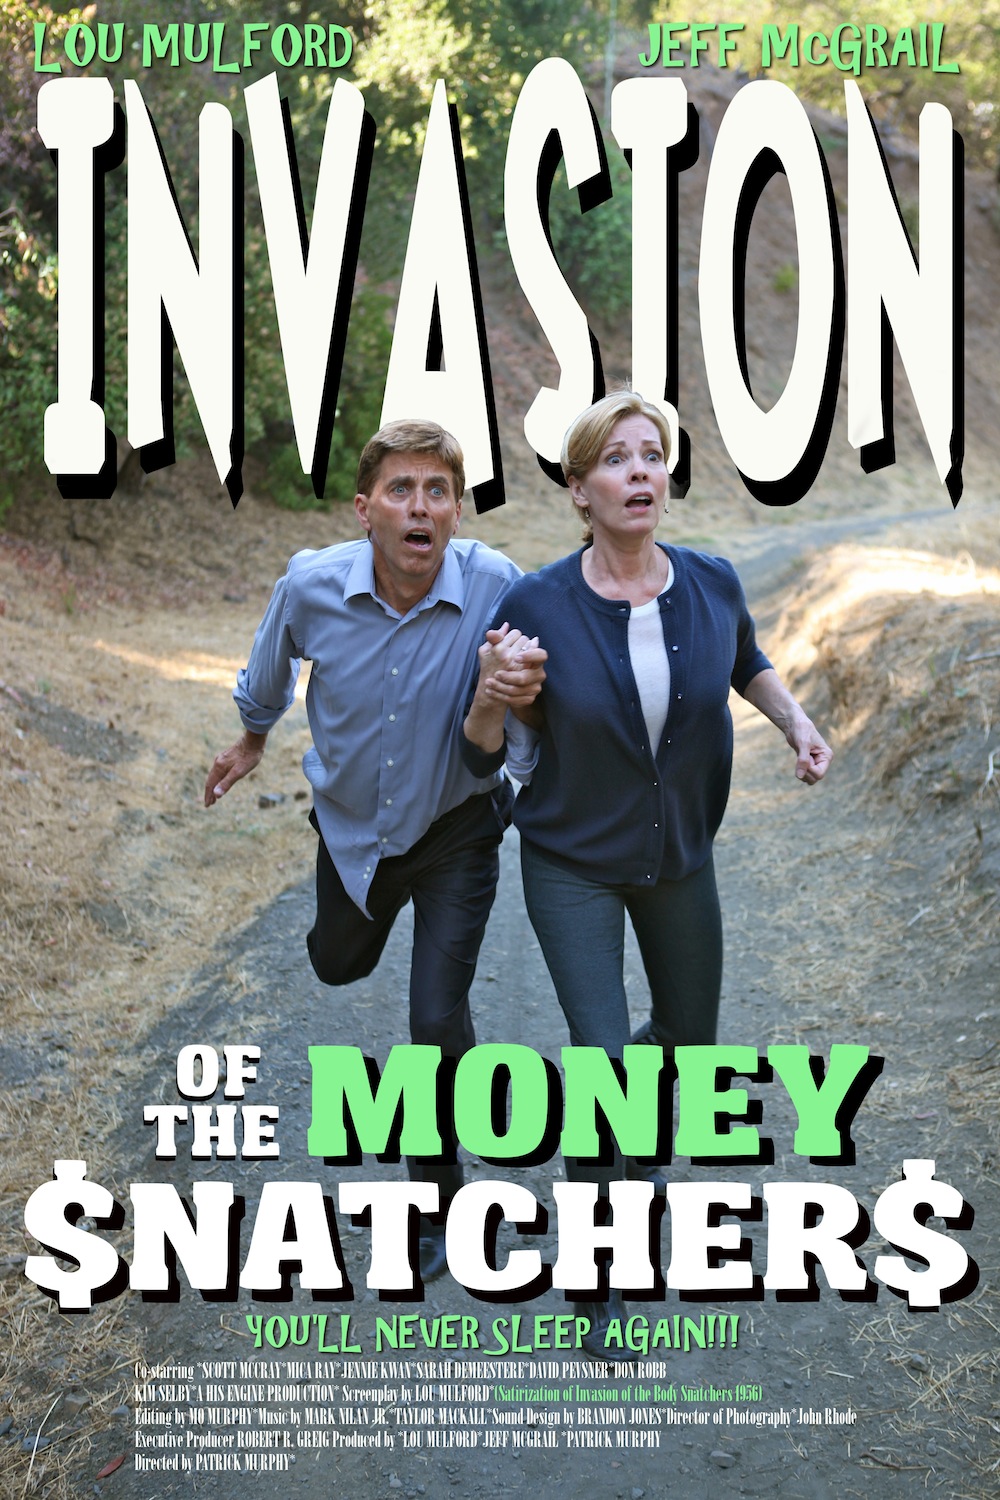 INVASION OF THE MONEY SNATCHERS poster designed by Robyn Sierchio with stars Jeff McGrail and Lou Mulford